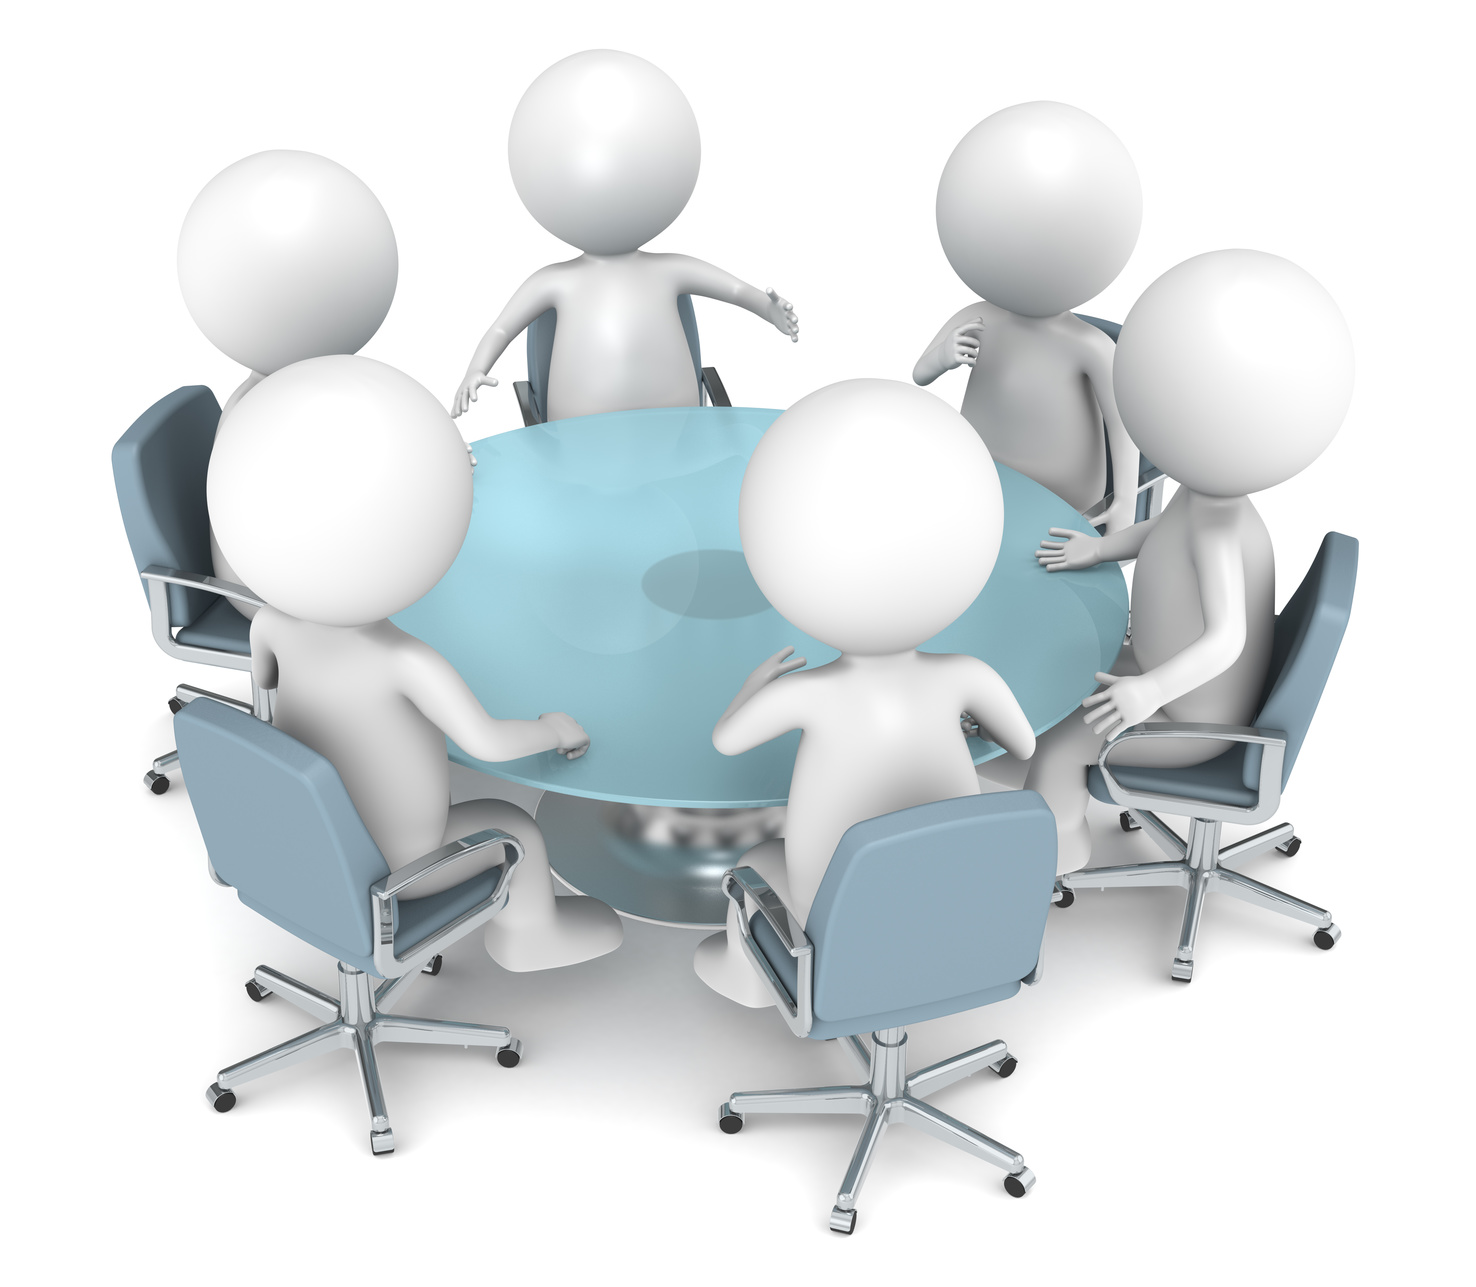 3D little human characters X6 discussing at a round table. Business People series.